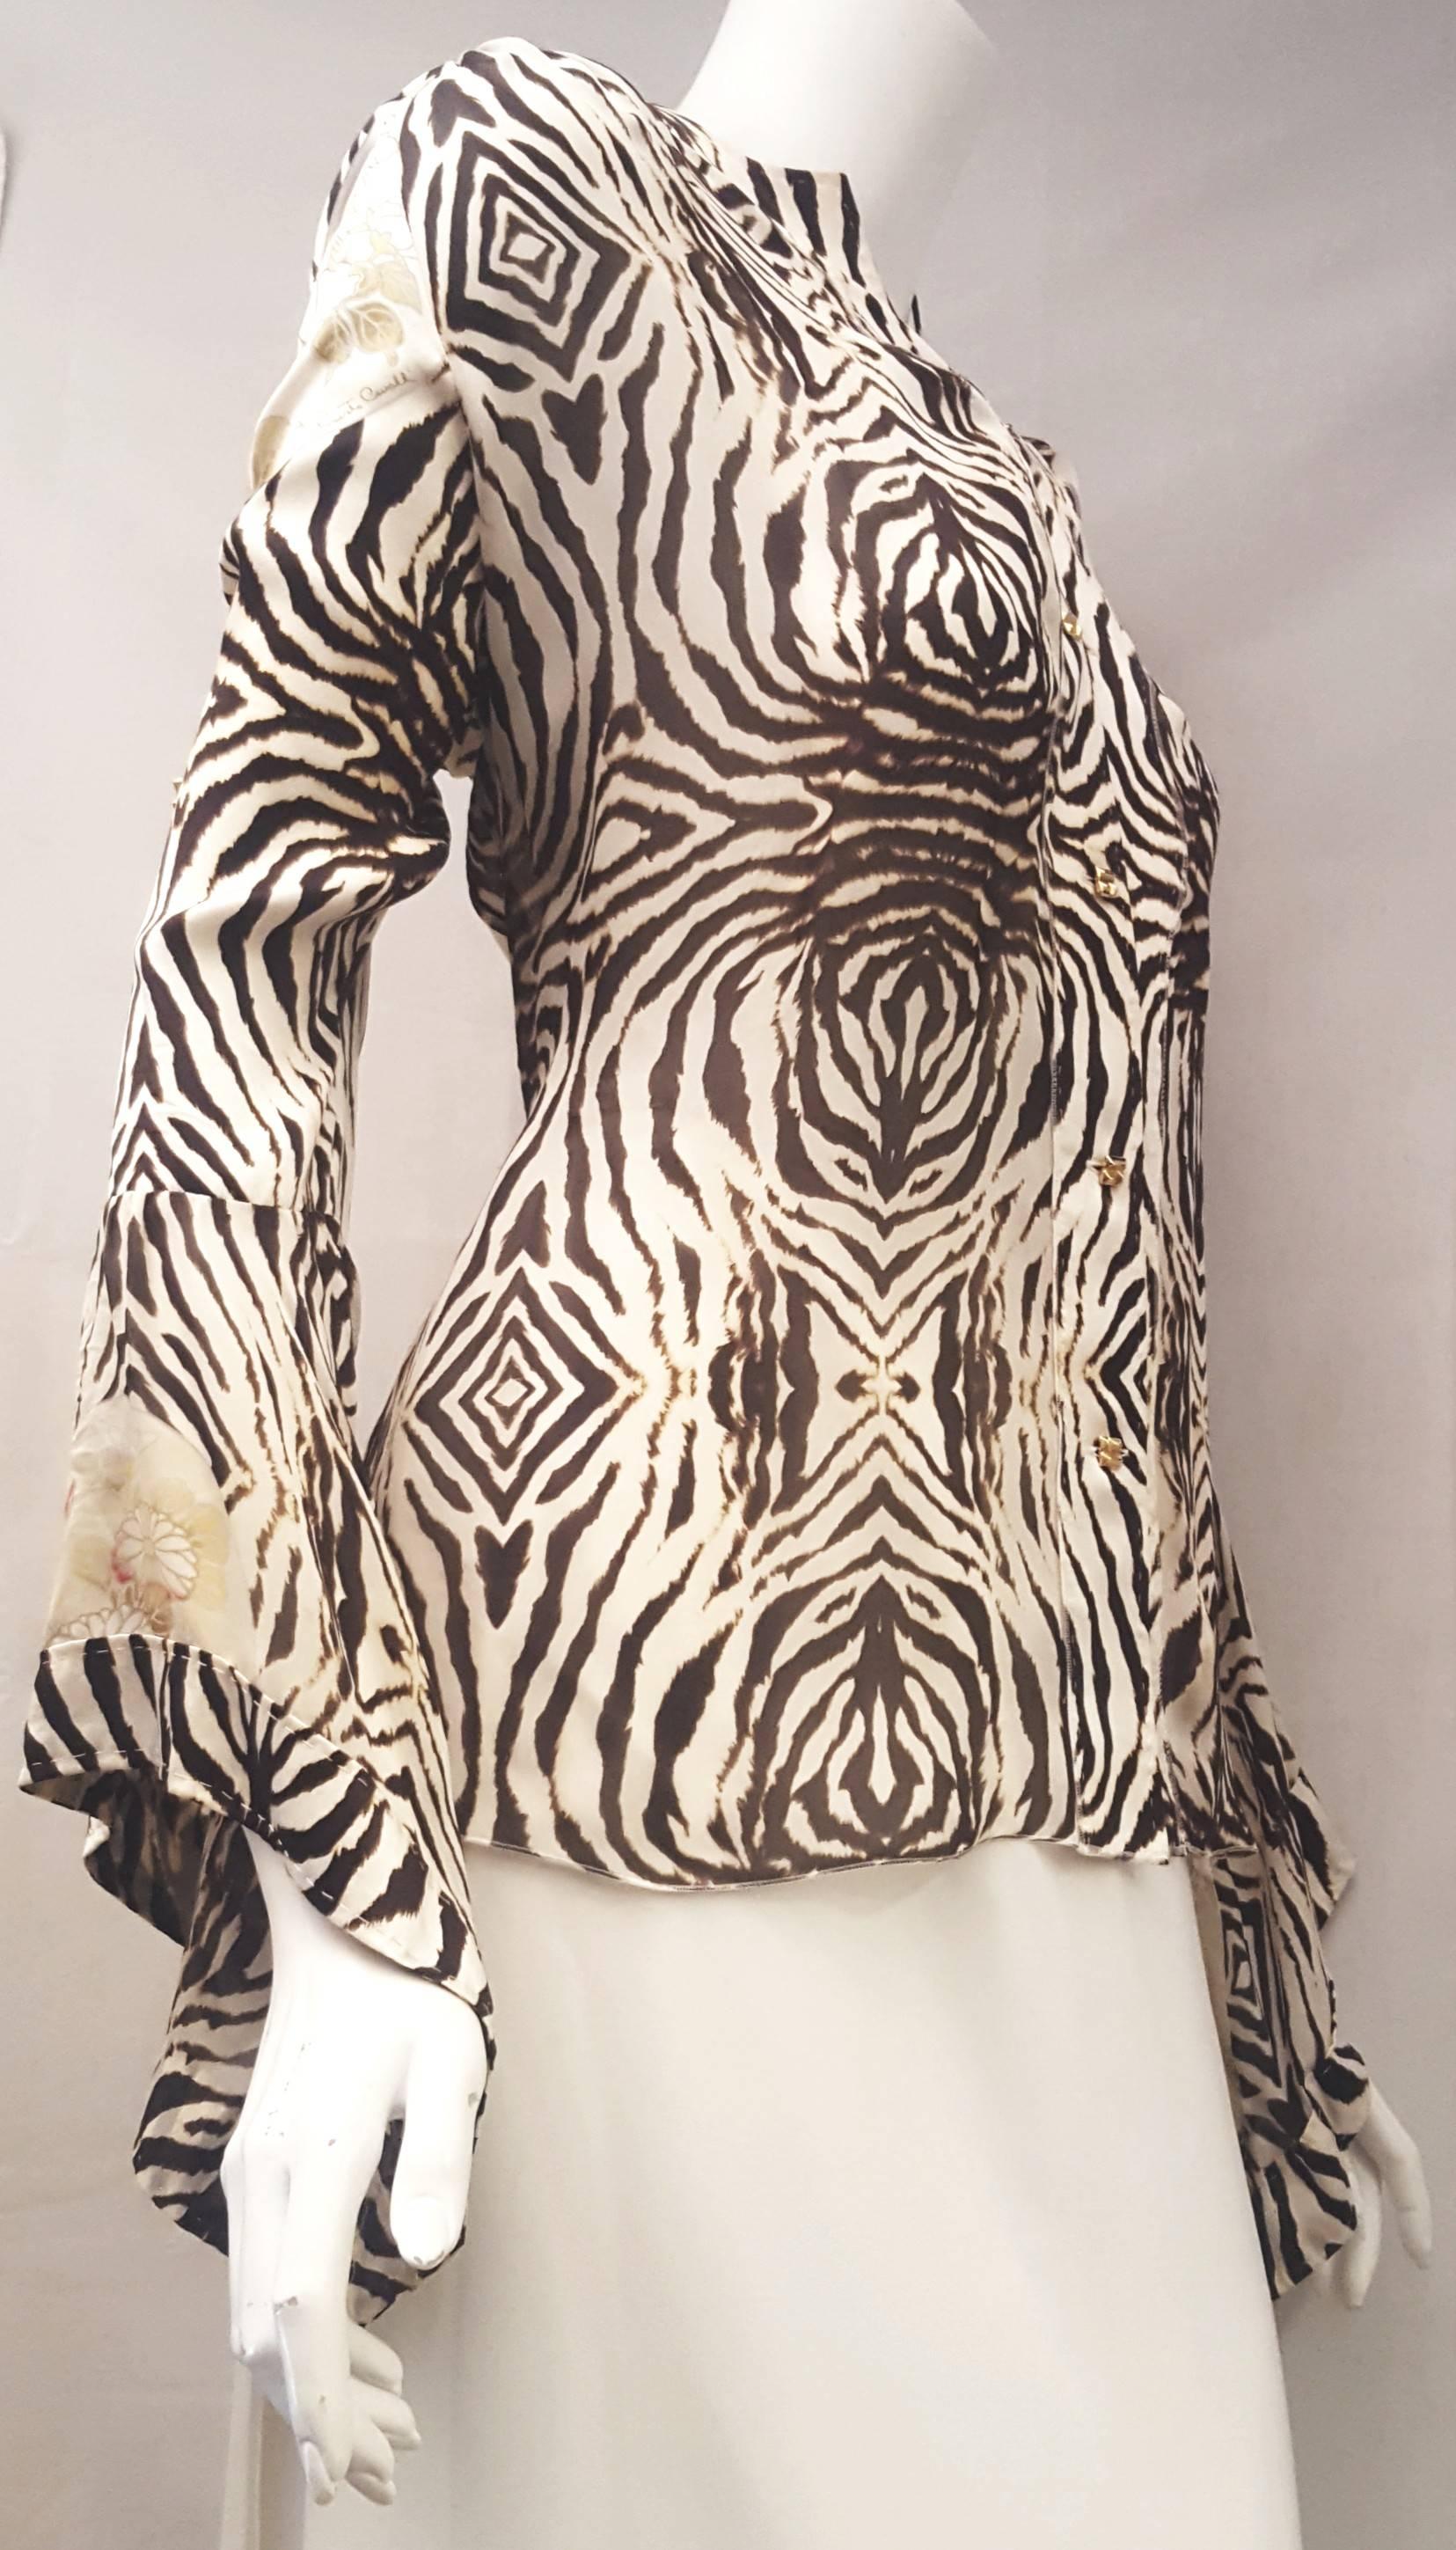 Roberto Cavalli's effortlessly draping top takes its cues from loose poncho fitting styles. It is lightweight and flowy, and this style comes with Zebra print with flower medallions throughout. The piece de resistance are the gold tone square